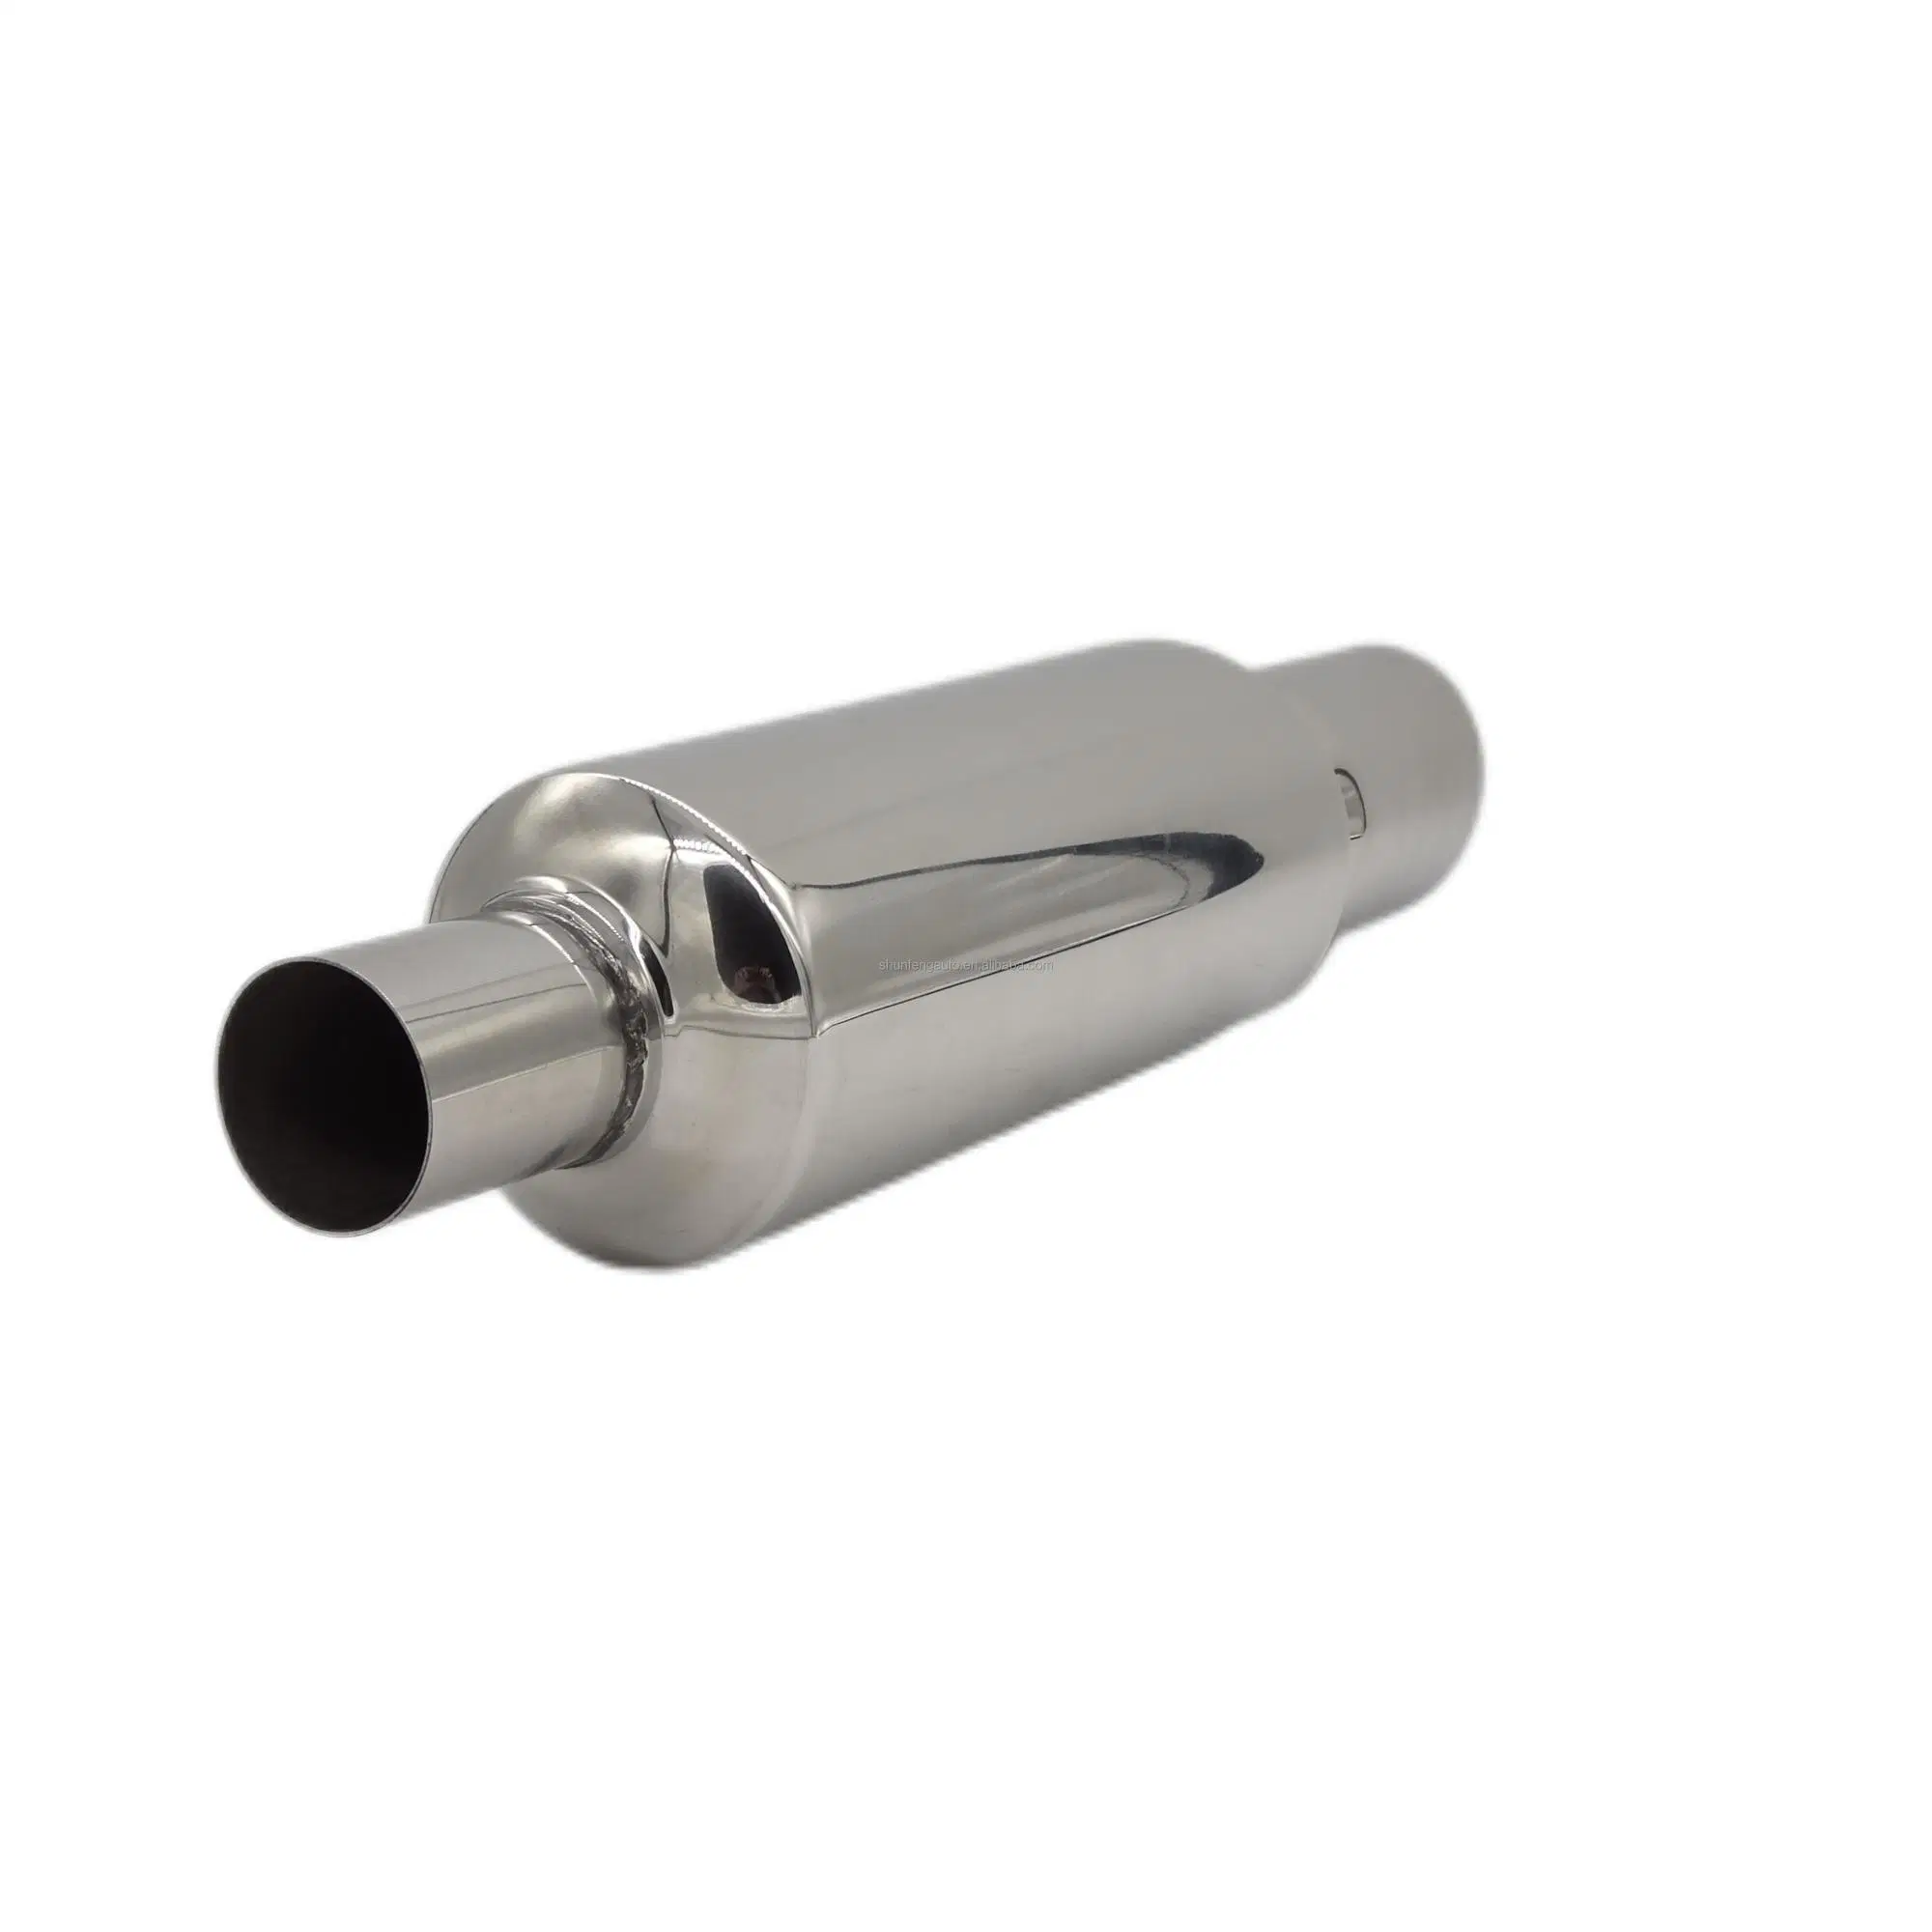 Custom Machining Stainless Steel Tail-Throat Downpipe Silencer Muffler for Exhaust System